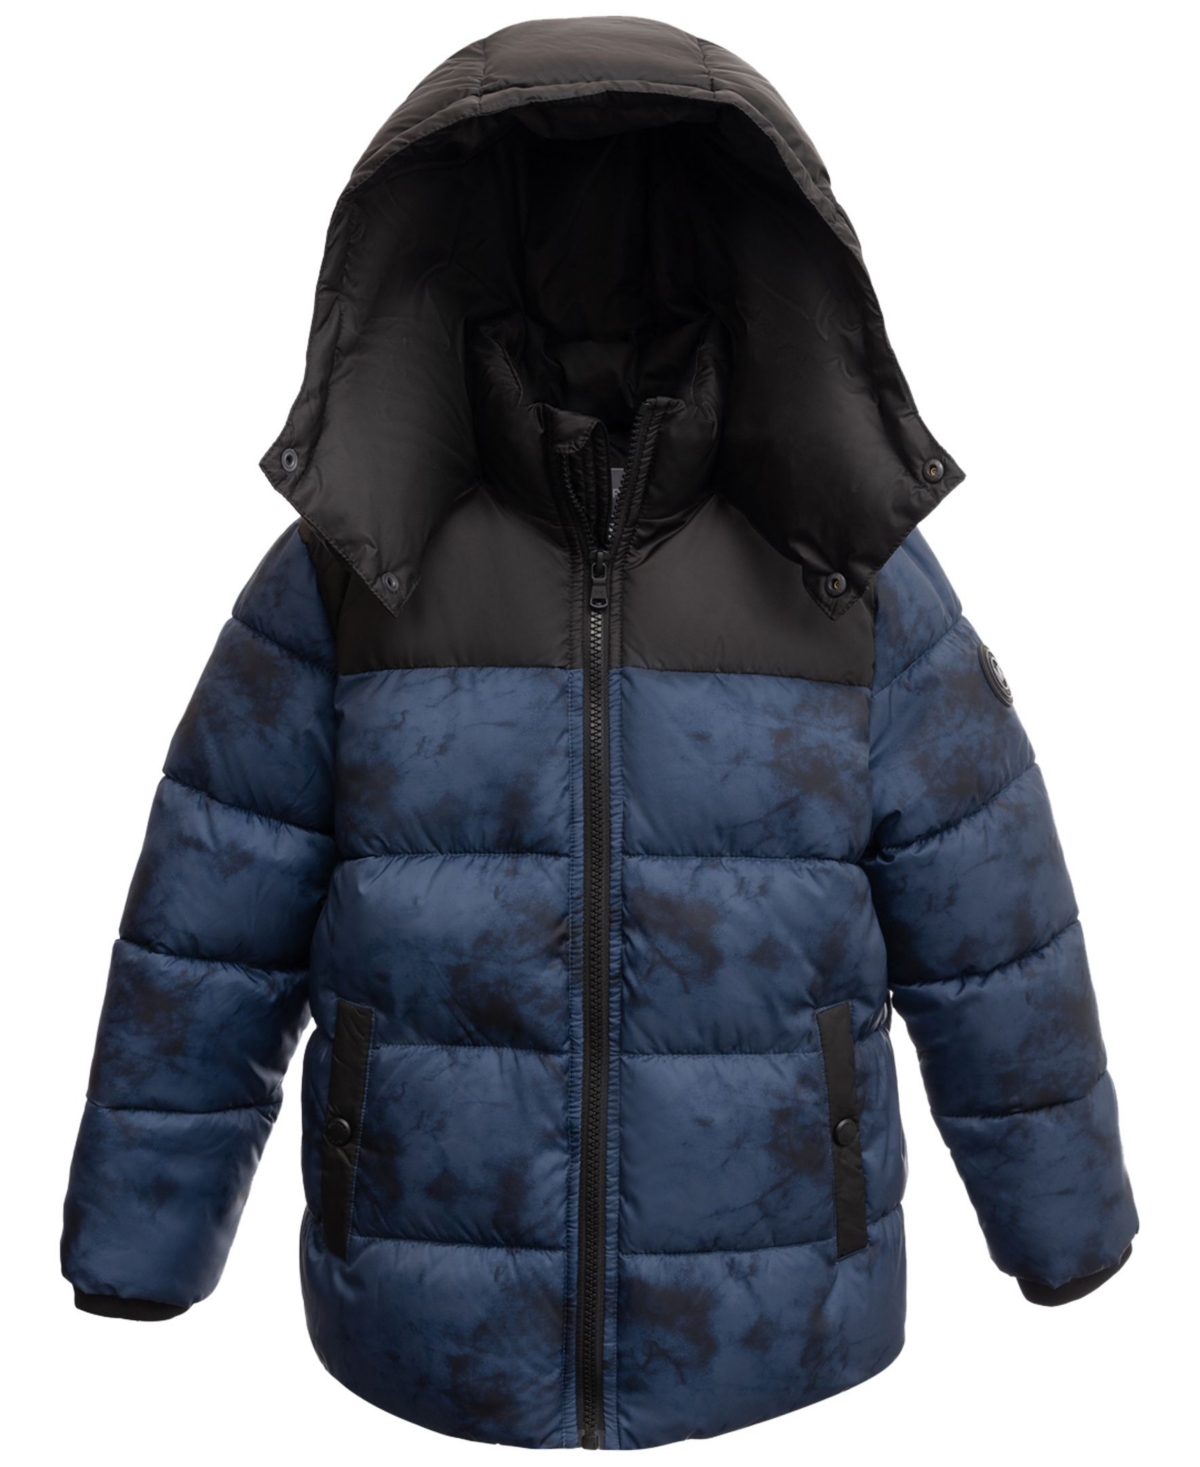 Michael Kors Kids' Toddler And Little Boys Heavy Weight Puffer Jacket In Midnight